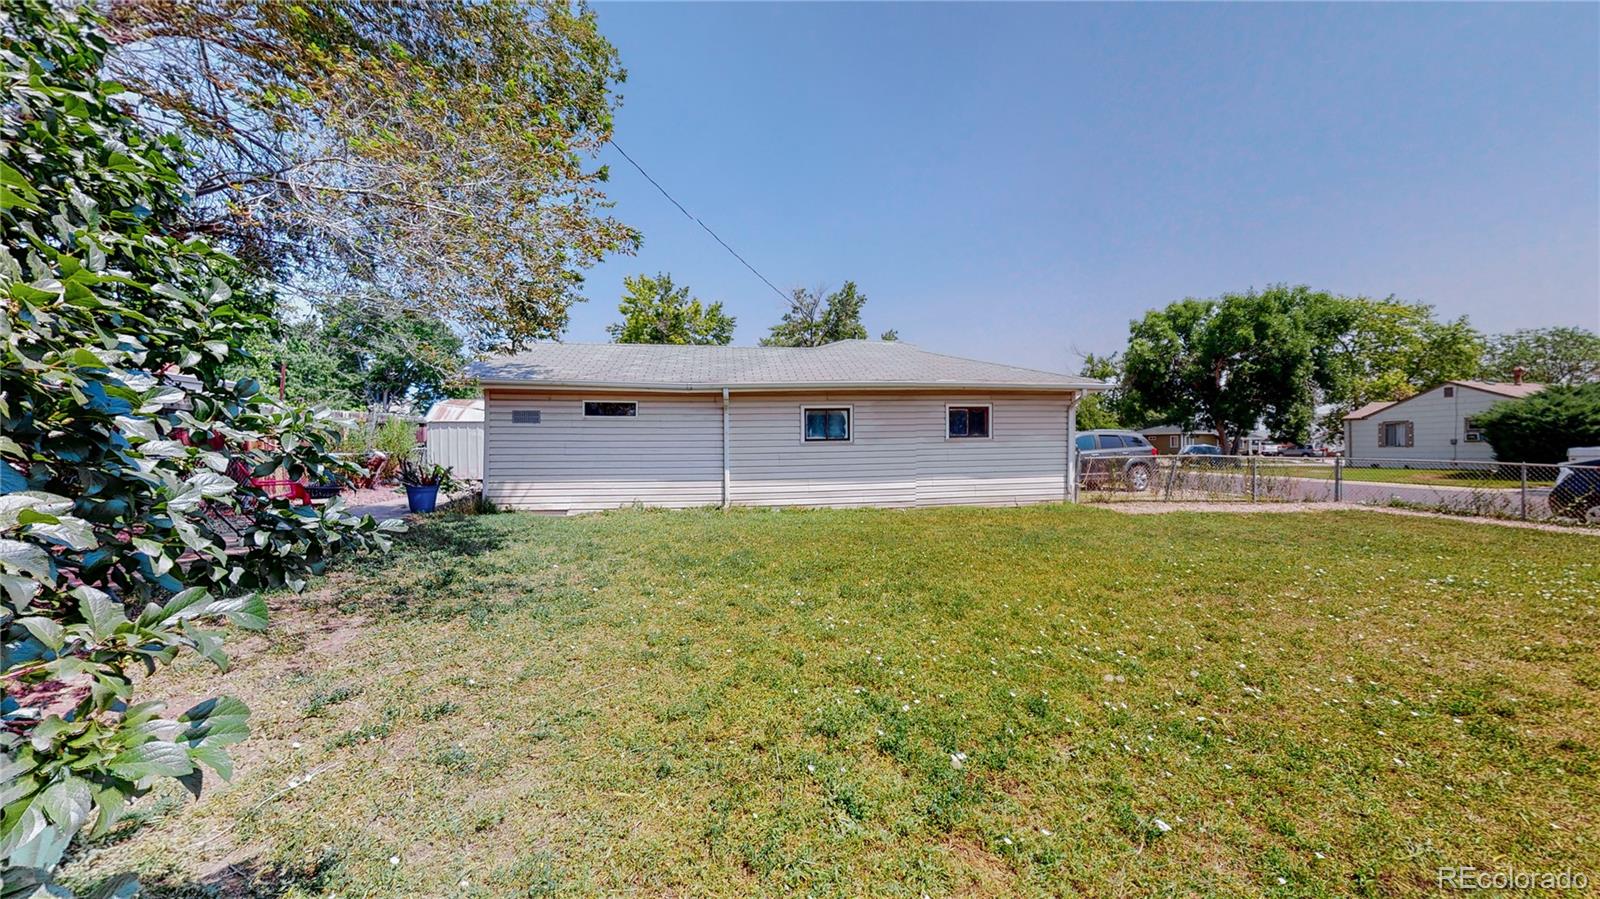 2700 90th, Federal Heights, CO